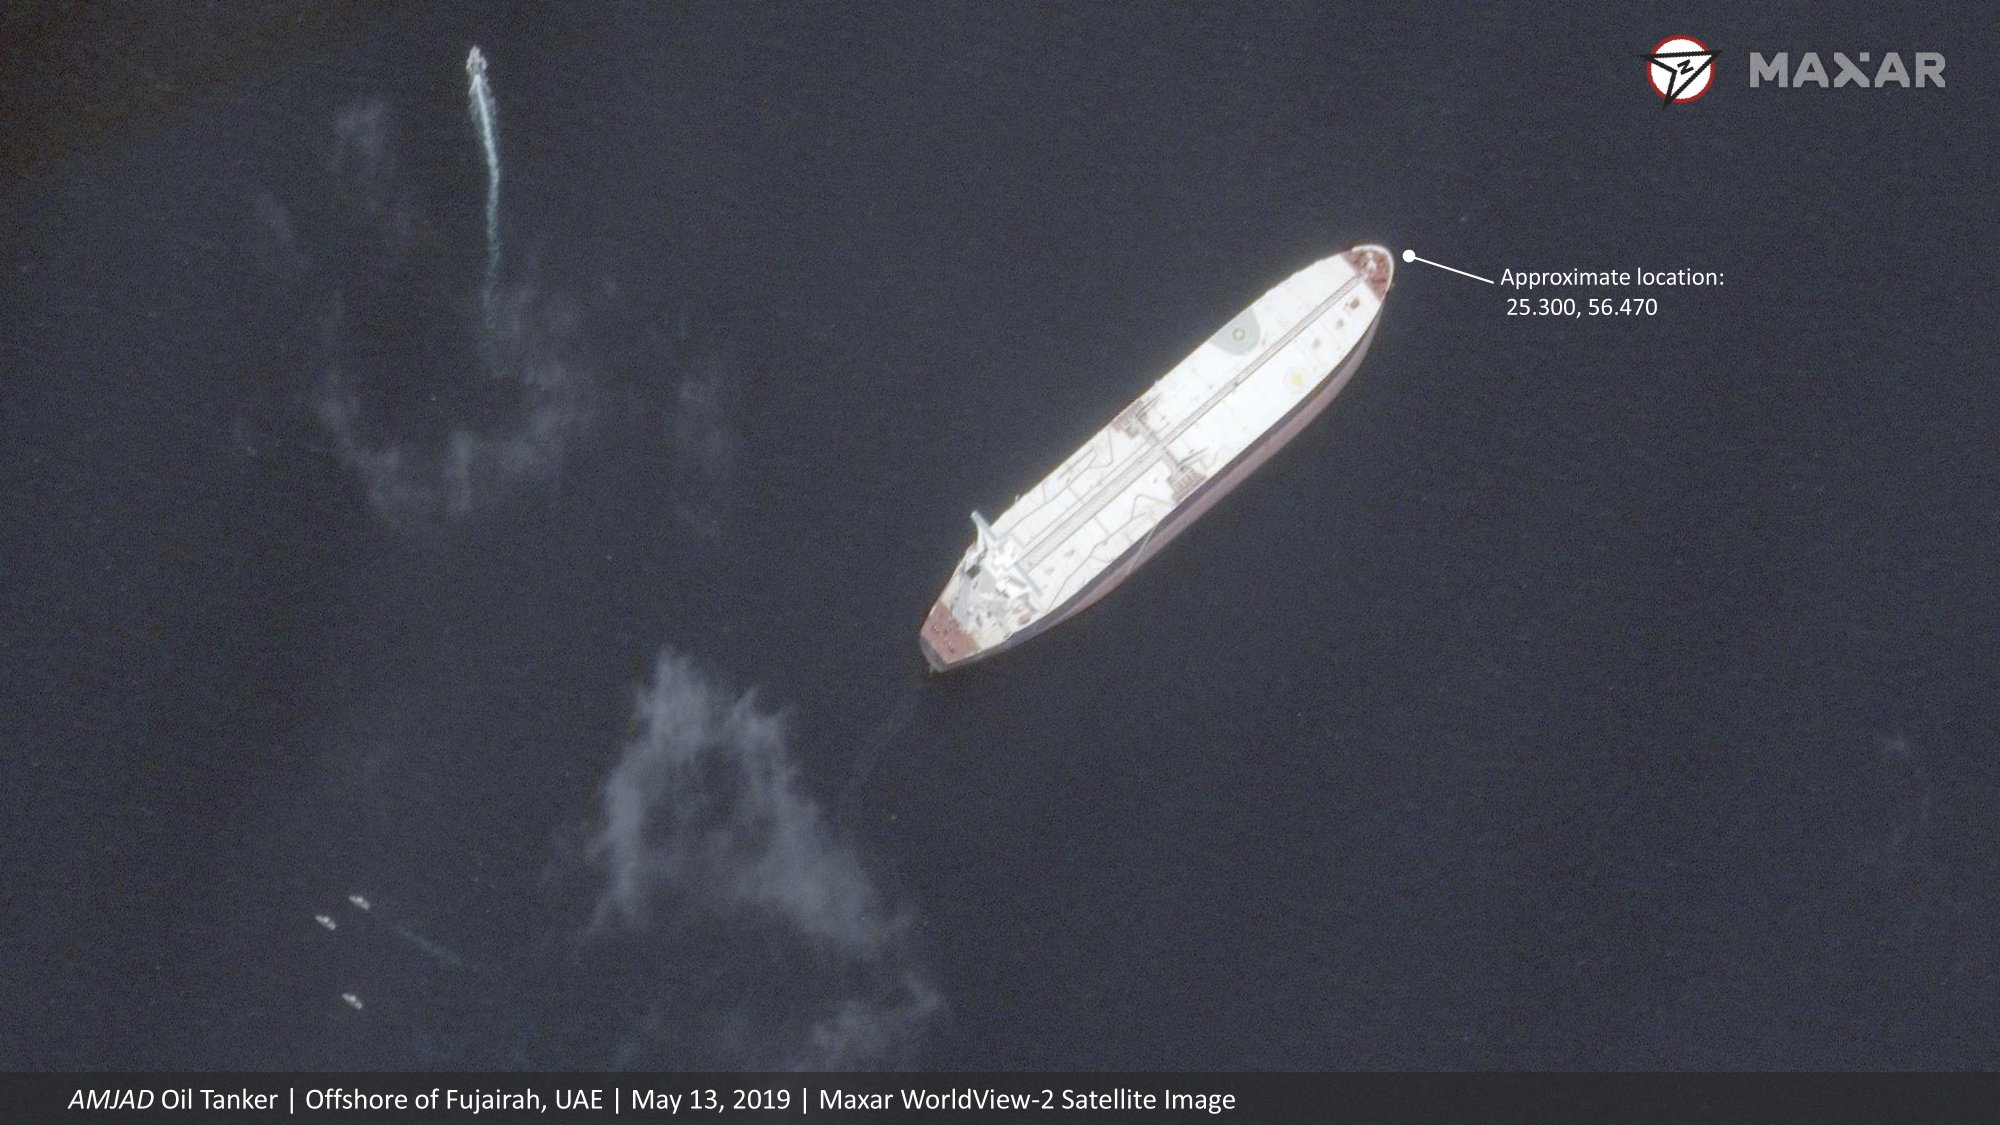 Satellite images show oil tankers allegedly sabotaged